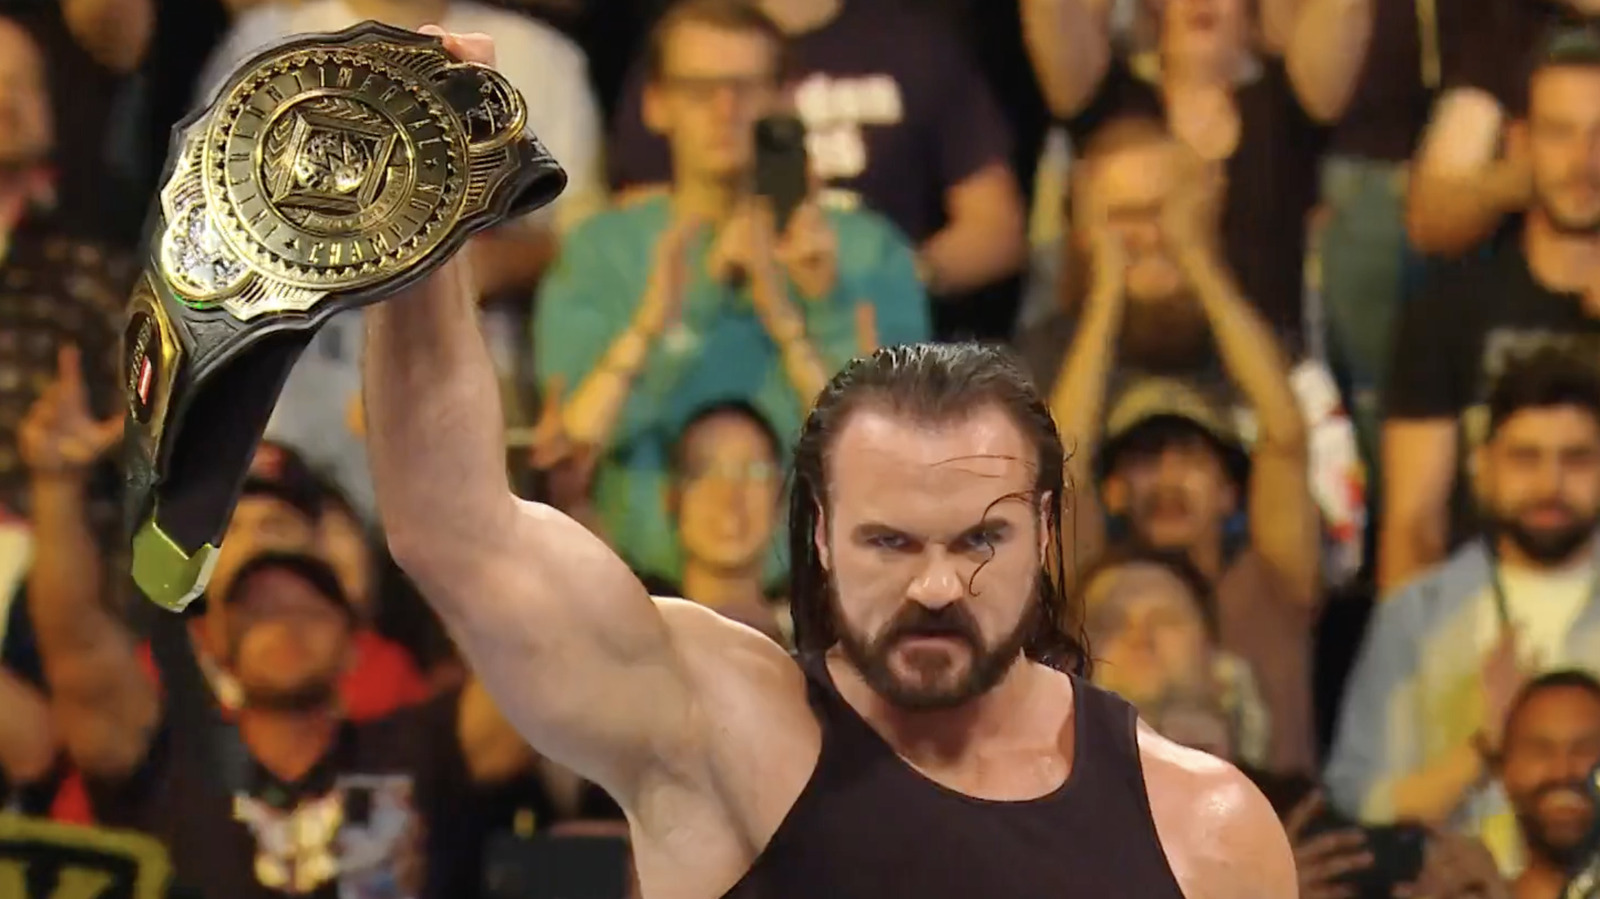 Drew McIntyre Returns To WWE, Confronts GUNTHER At Money In The Bank